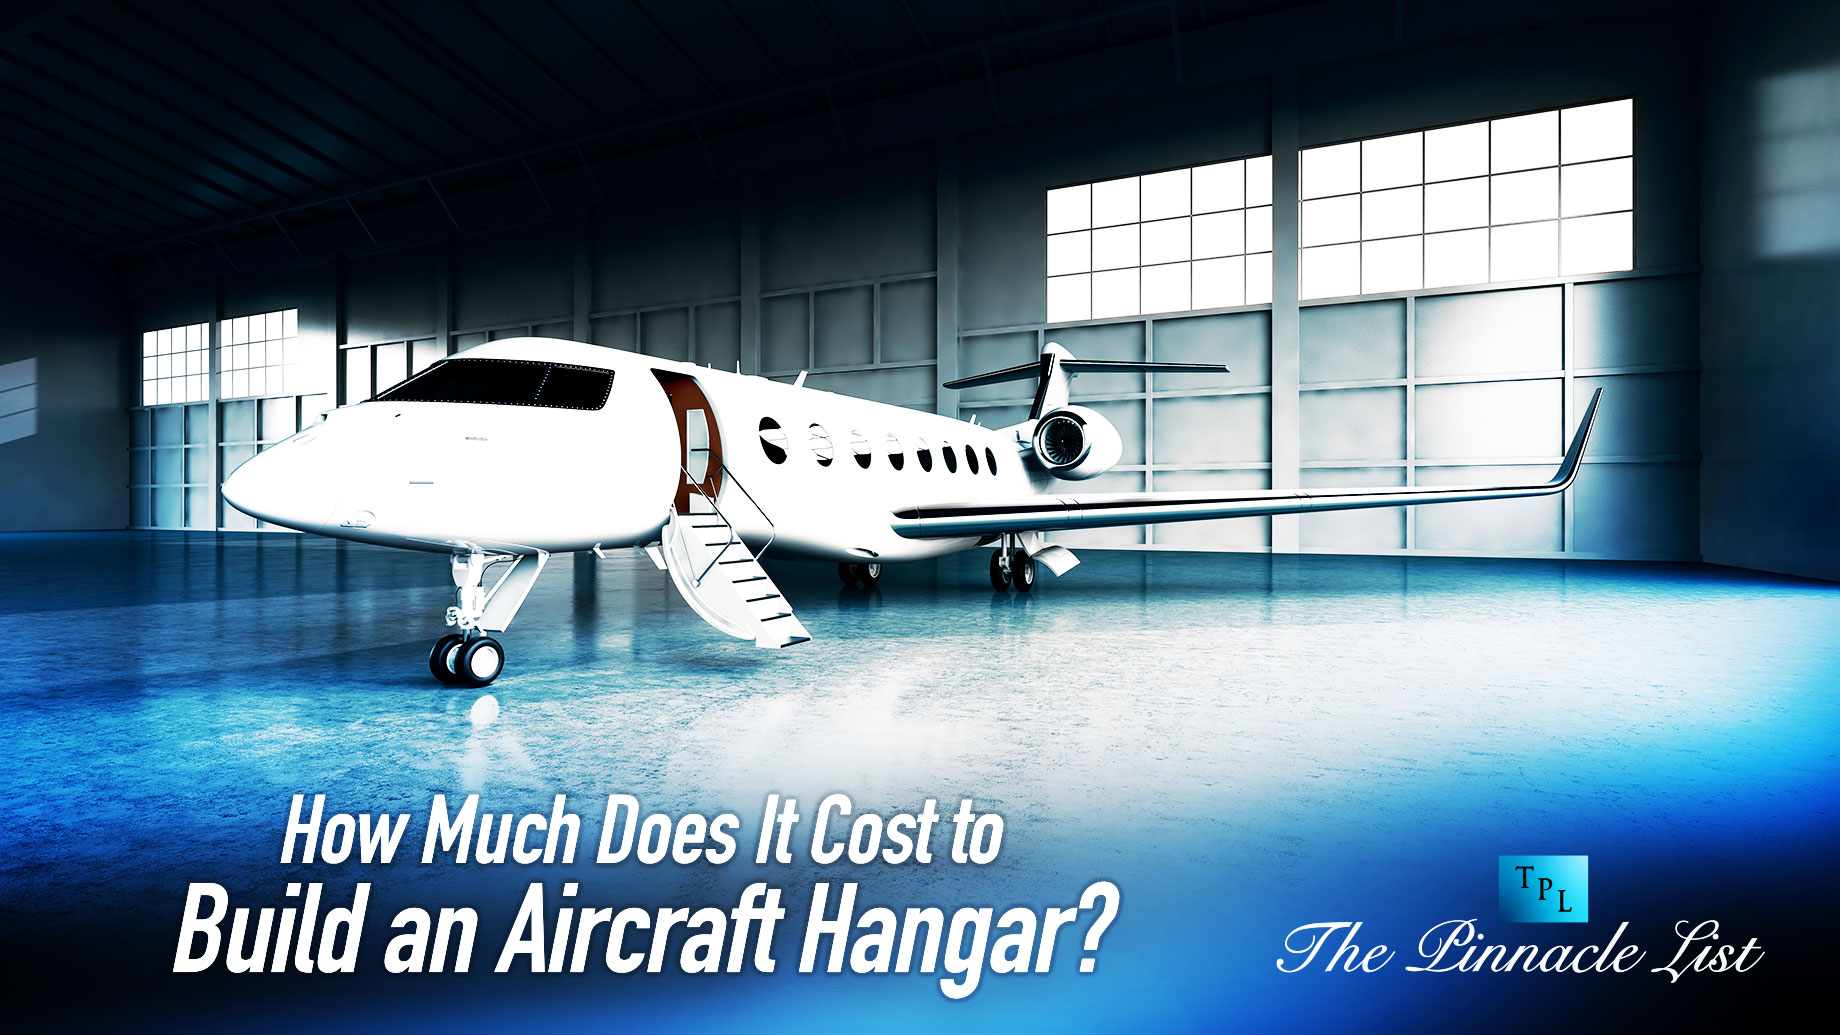 How Much Does It Cost to Build an Aircraft Hangar?